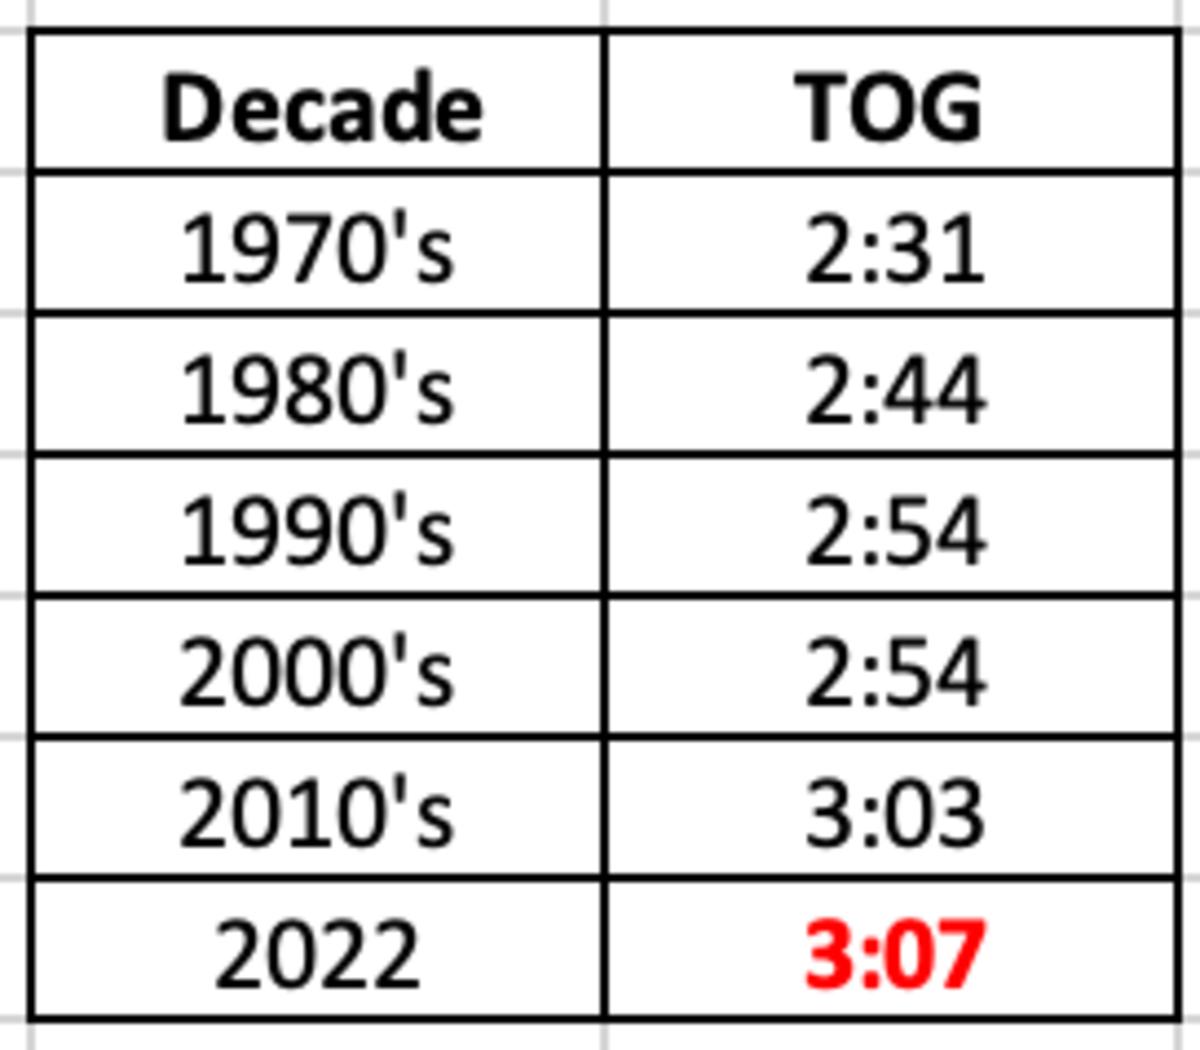 MLB Time of Game Increases by Decade